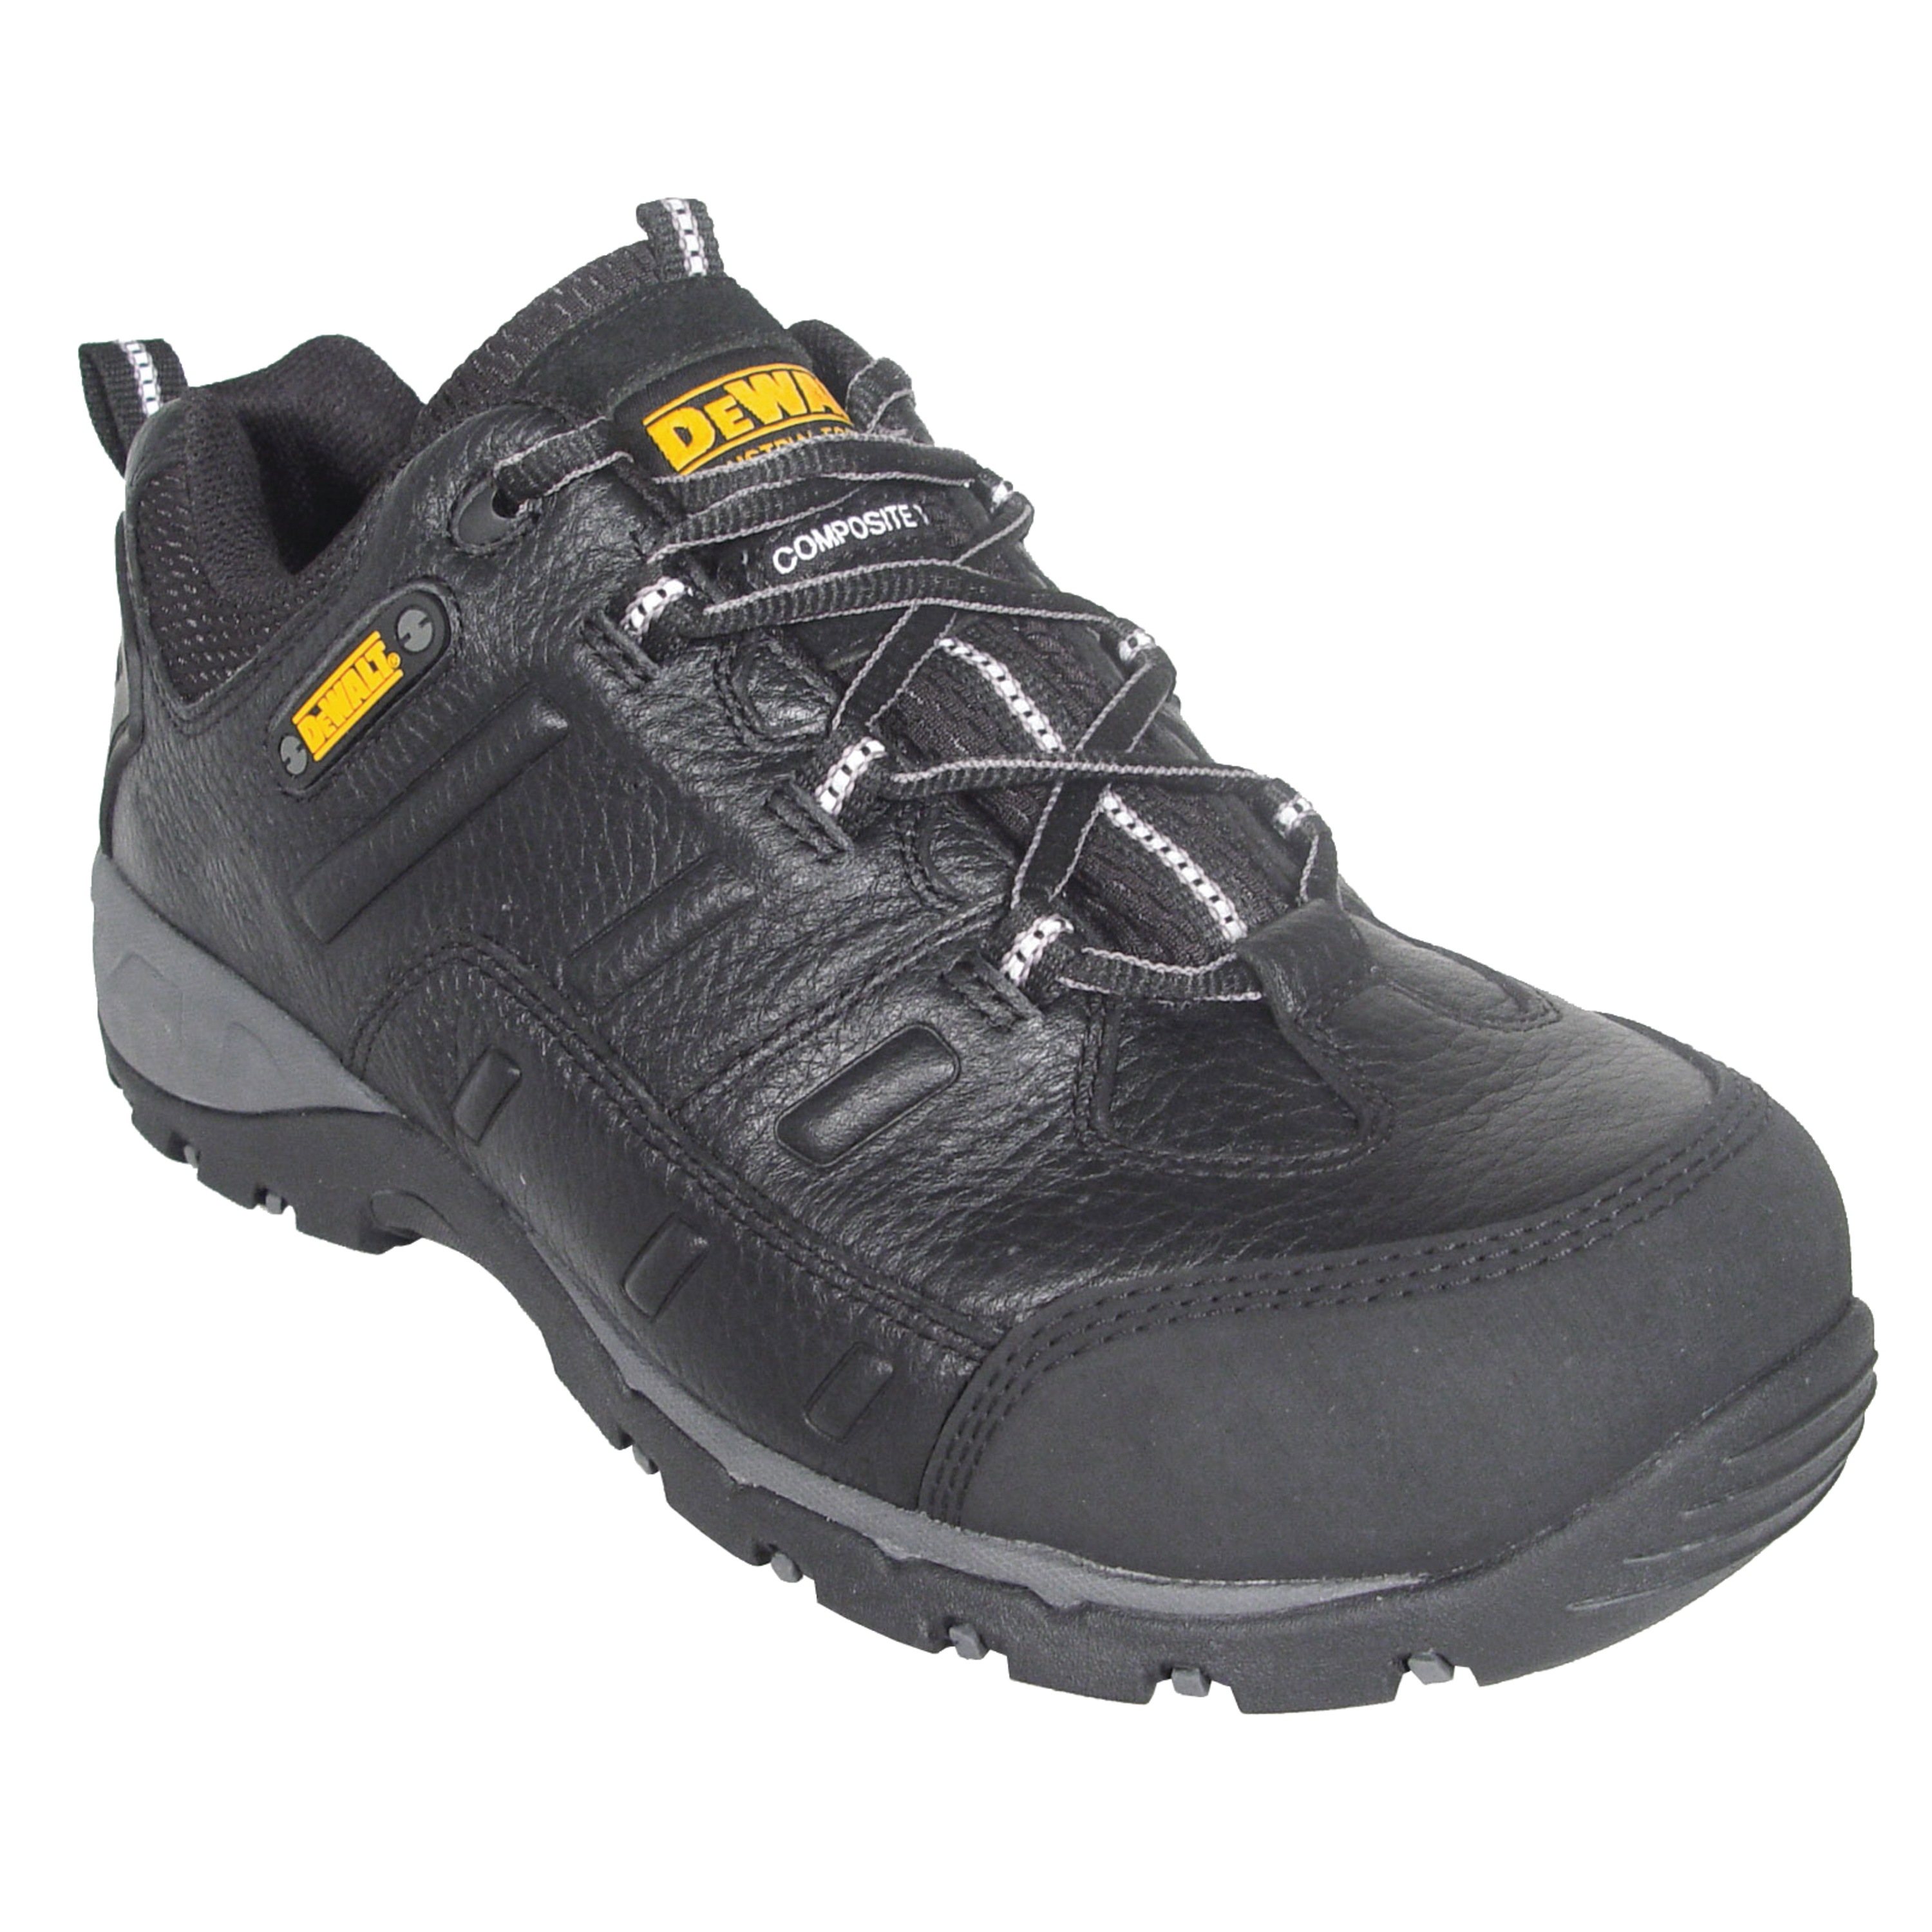 composite safety boots ireland